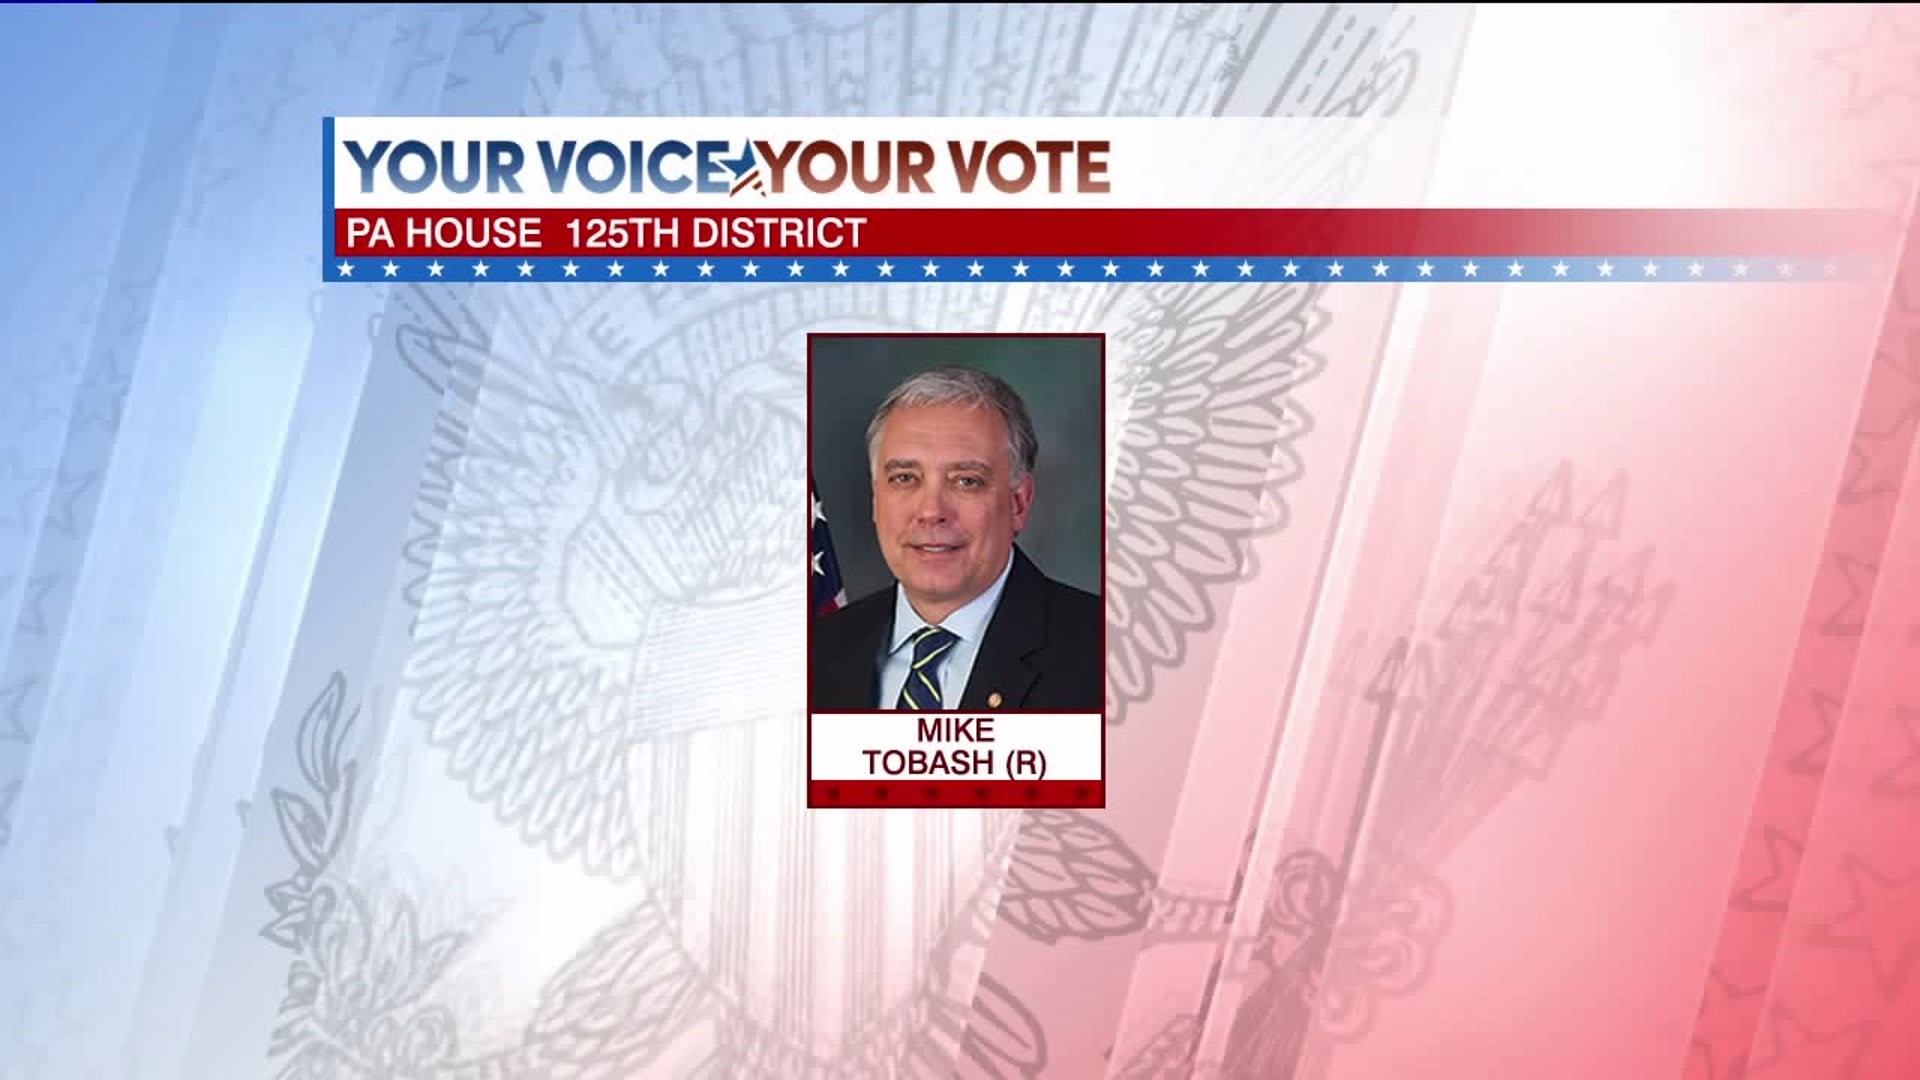 Longtime Lawmaker in Schuylkill County Will Not Seek Re-election